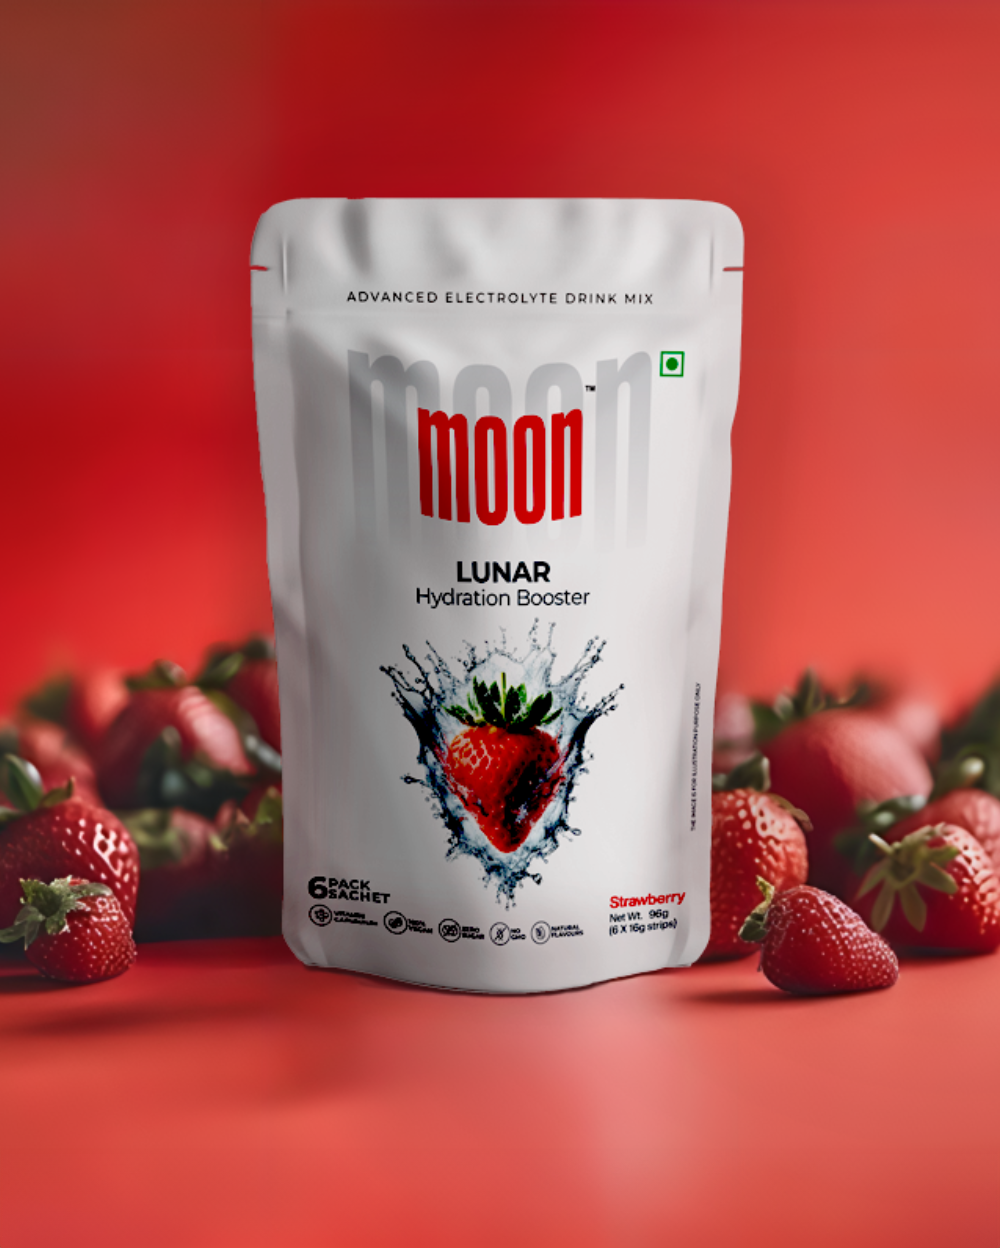 A packet of Moon Strawberry Lunar Hydration Booster powder with SEO keywords: outdoor wireless security camera, night vision on a red background.